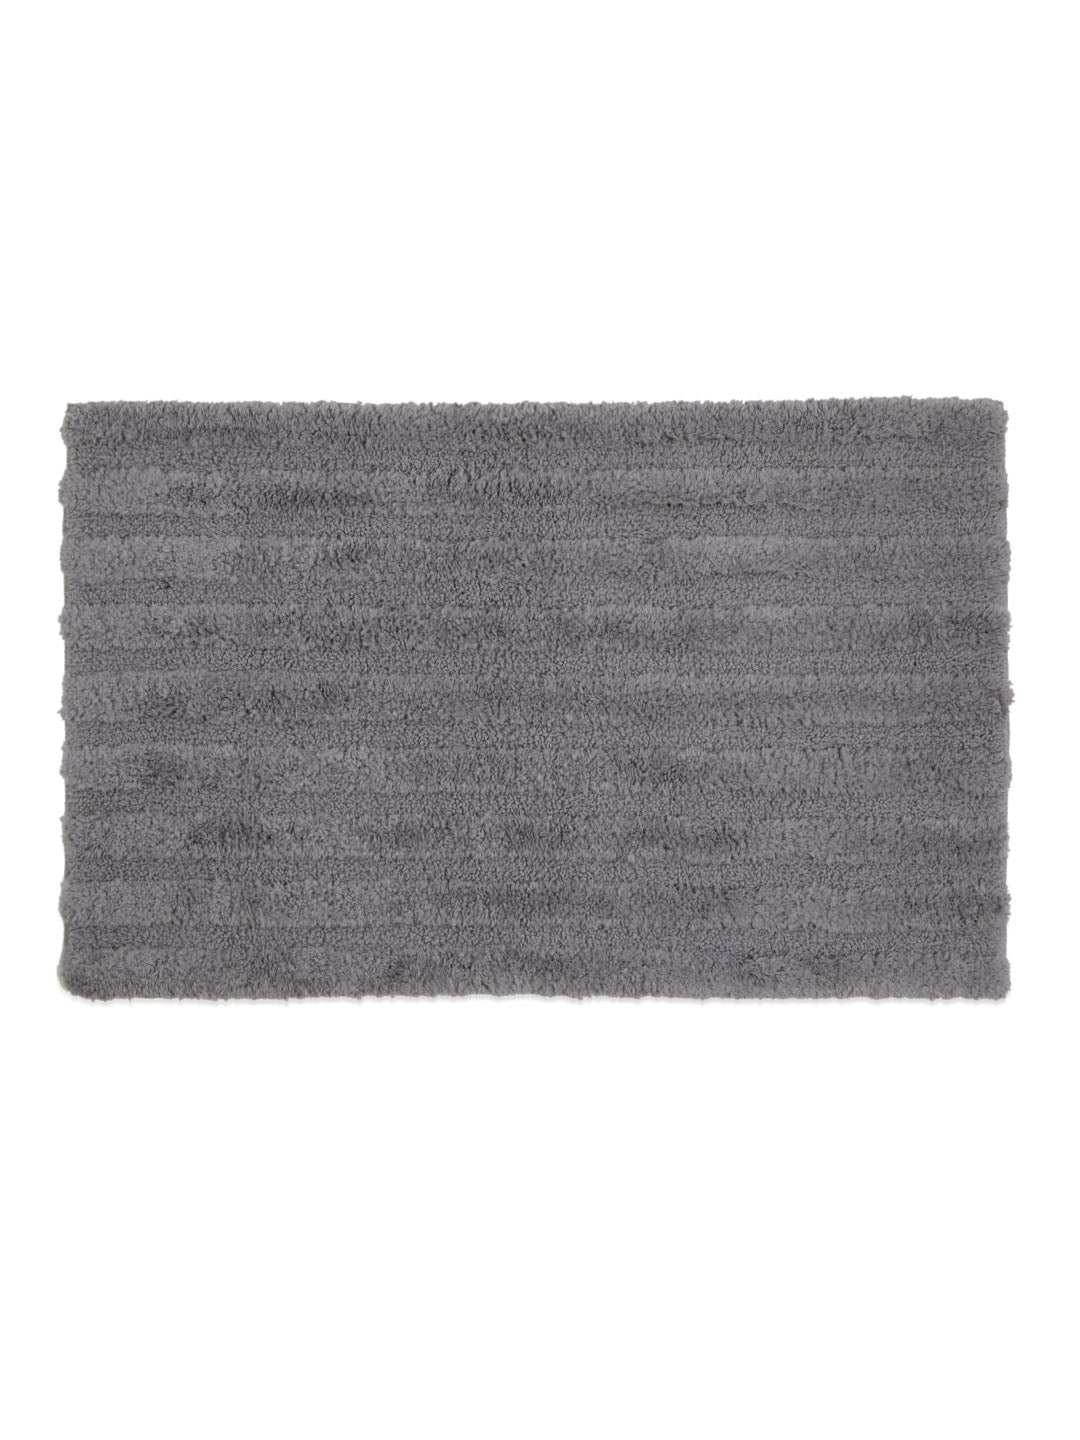 Spaces Swift Dry Pewter Bath Mat (Grey)